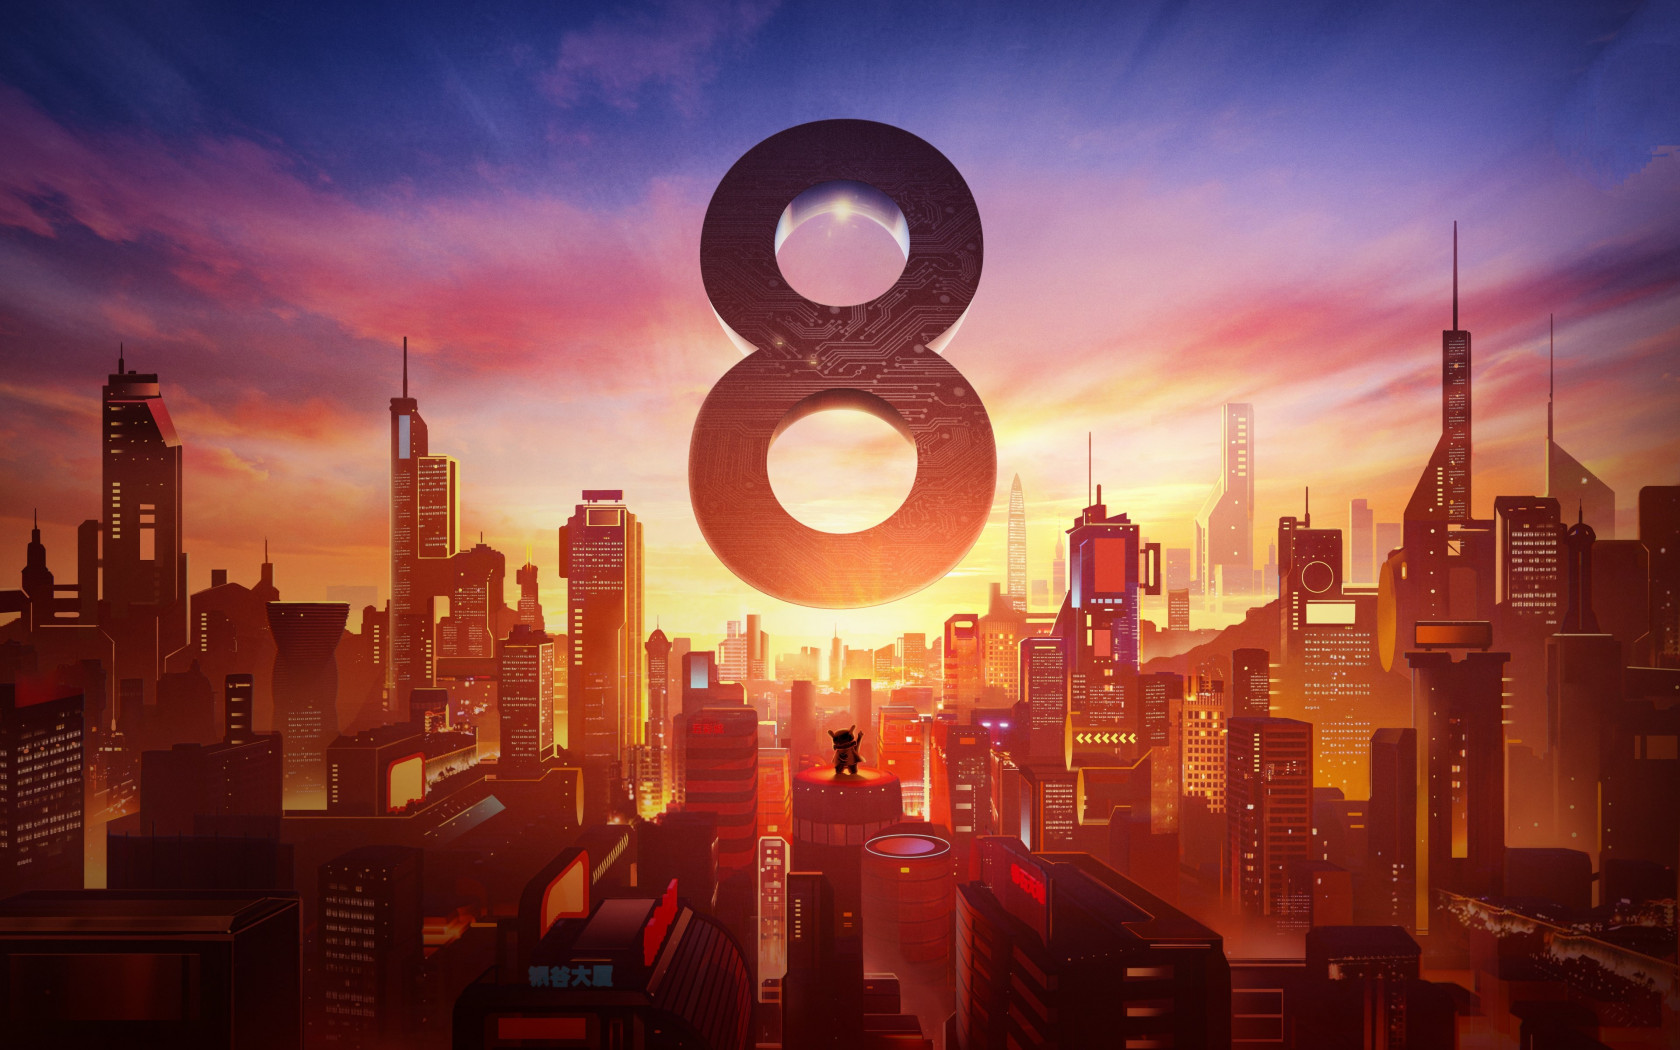 Xiaomi Mi 8. Poster from the launch event wallpaper 1680x1050